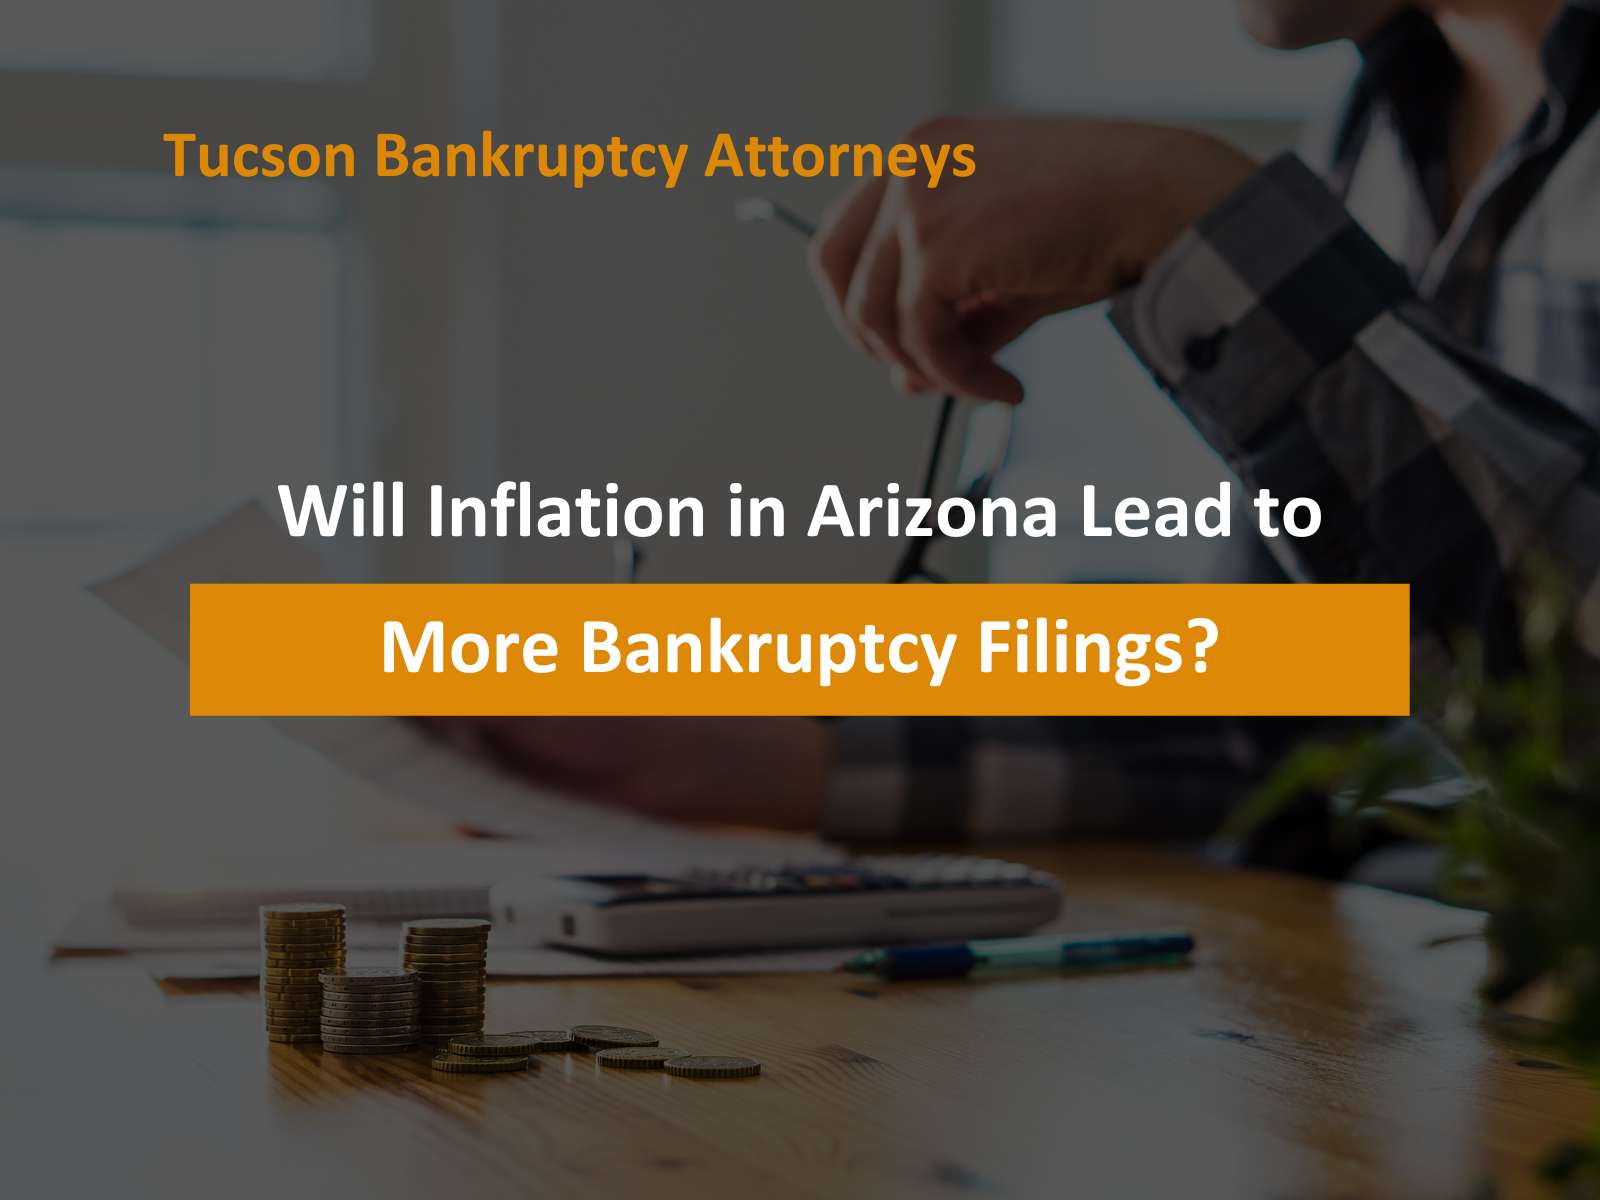 Will Inflation in Arizona Lead to More Bankruptcy Filings?